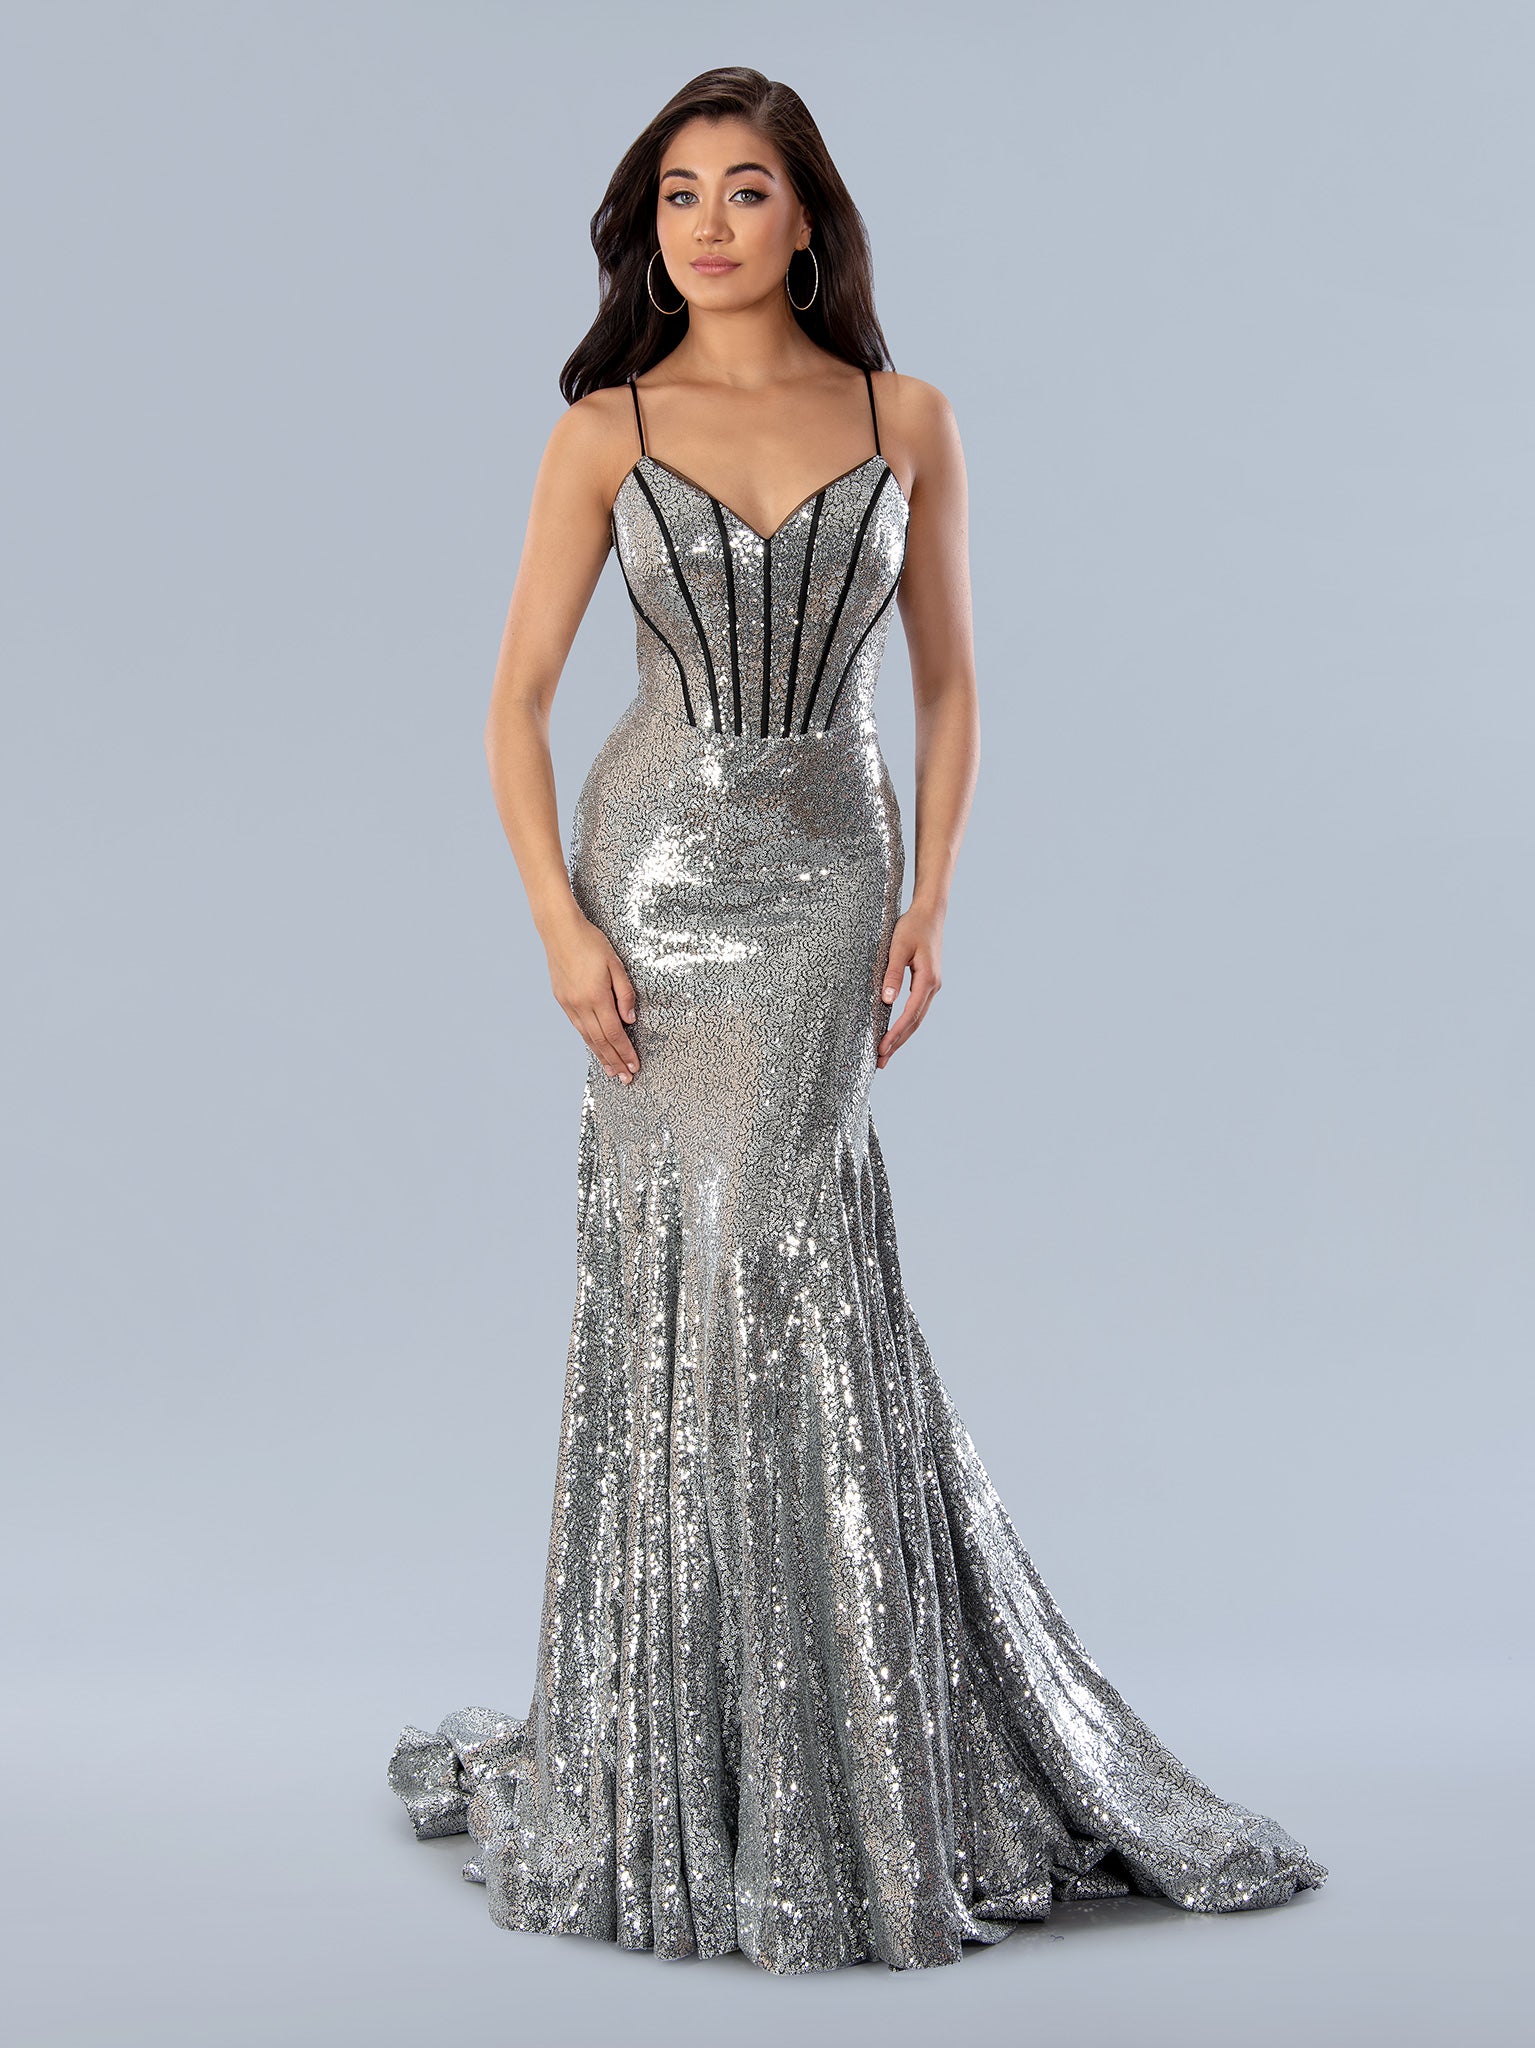 The Stella Couture 24202 Long Sequined Mermaid Gown is perfect for any formal event. Made of sparkling sequins, its mermaid silhouette flatters the figure, while its V-neck and corset closure enhance the fit.  Sizes: 0-16  Colors: Silver